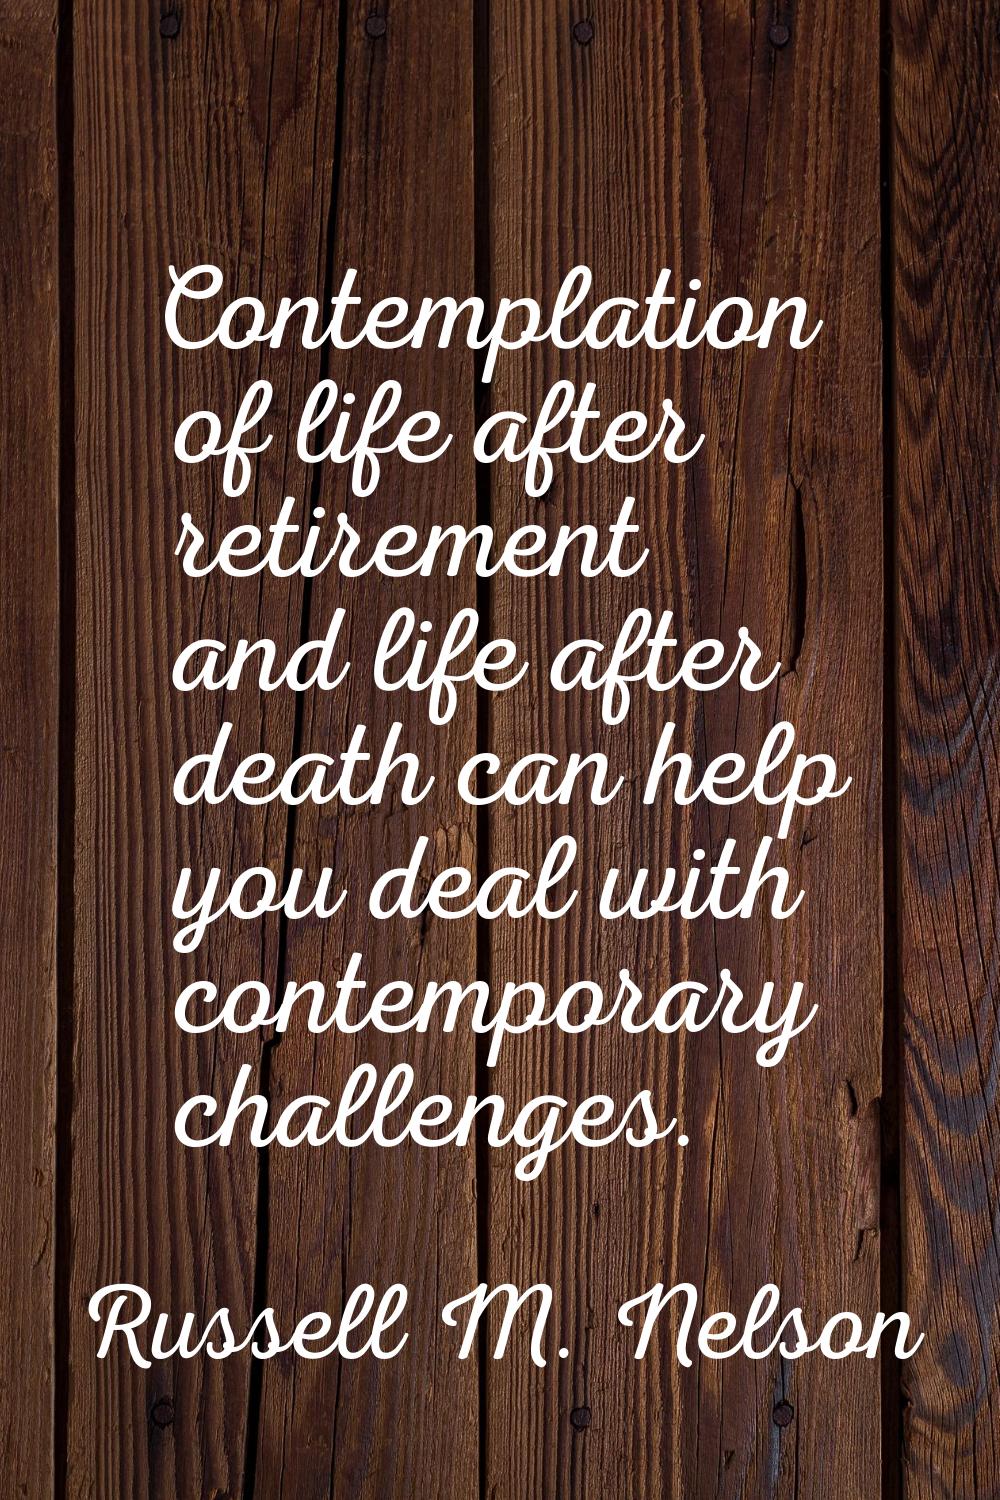 Contemplation of life after retirement and life after death can help you deal with contemporary cha